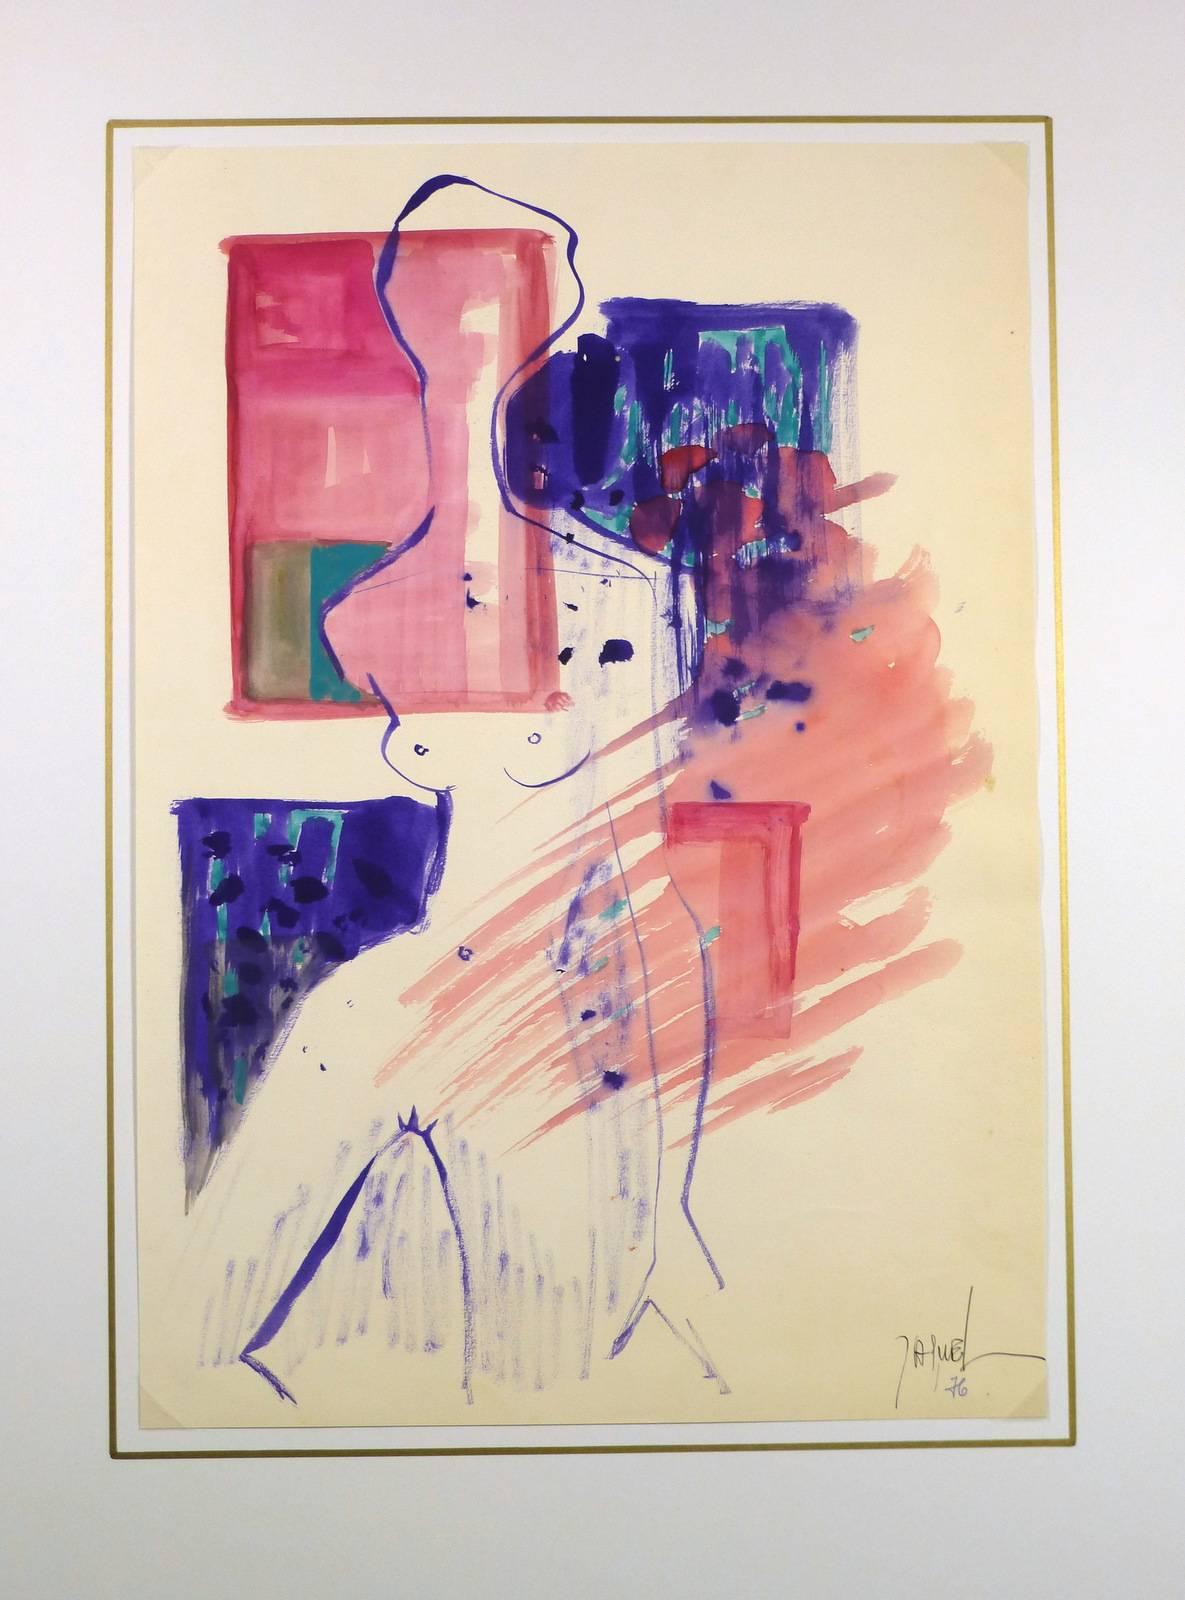 Modern female nude in pink and purple by French artist Jaquel, 1976. Signed lower right.  

Original artwork on paper displayed on a white mat with a gold border. Mat fits a standard-size frame.  Archival plastic sleeve and Certificate of